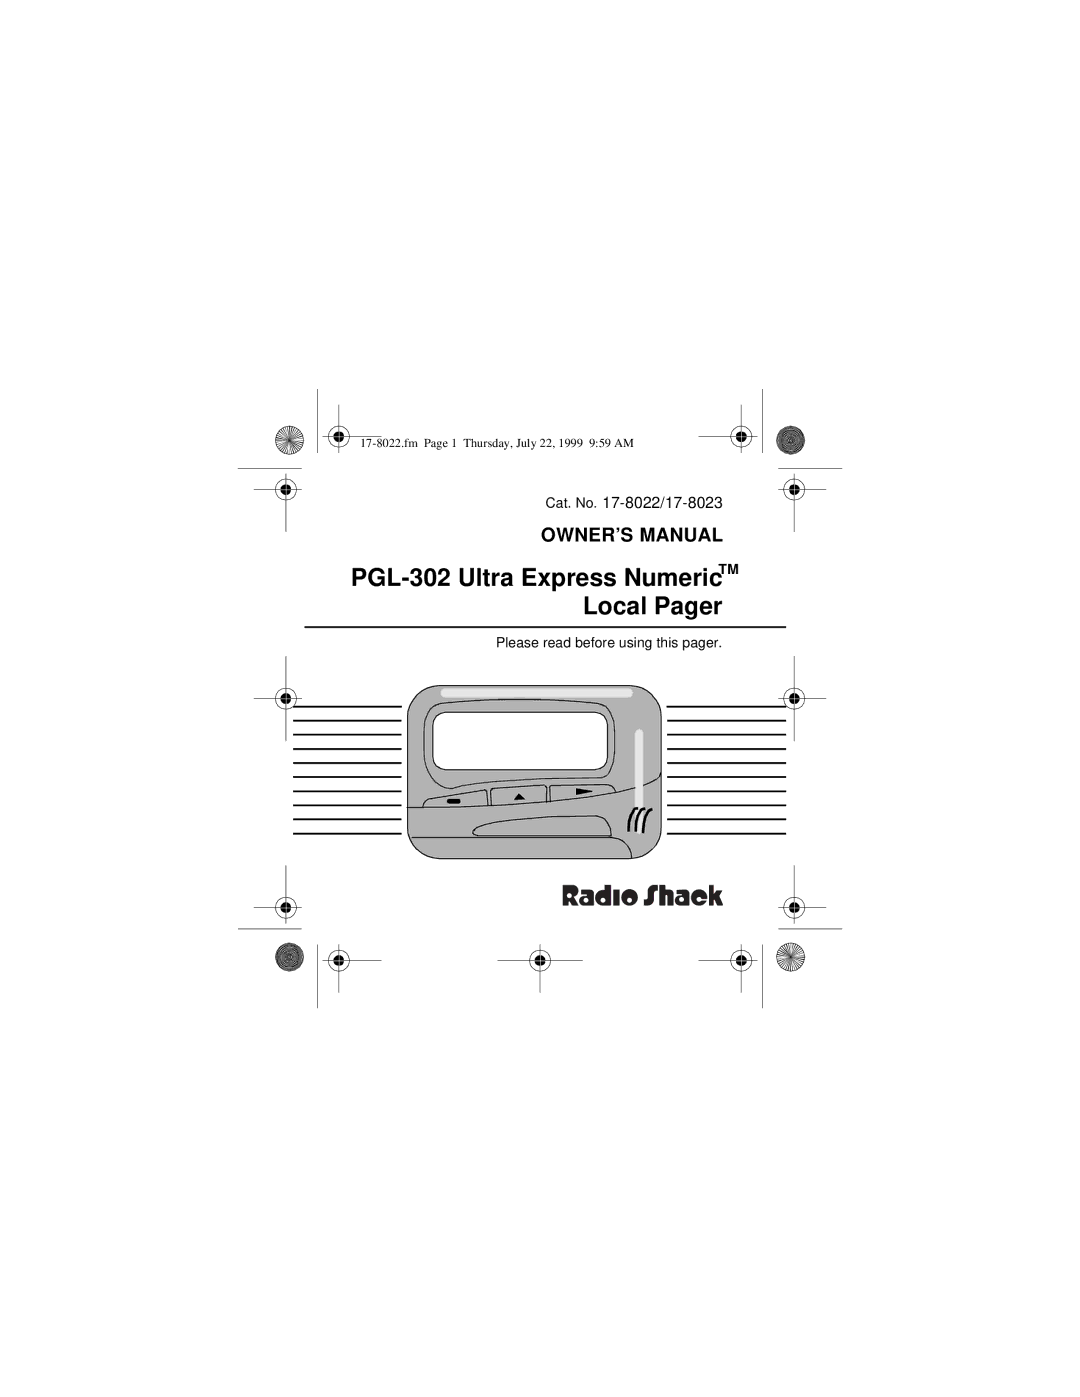 Radio Shack 17-8023, 17-8022 owner manual PGL-302 Ultra Express NumericTM Local Pager 